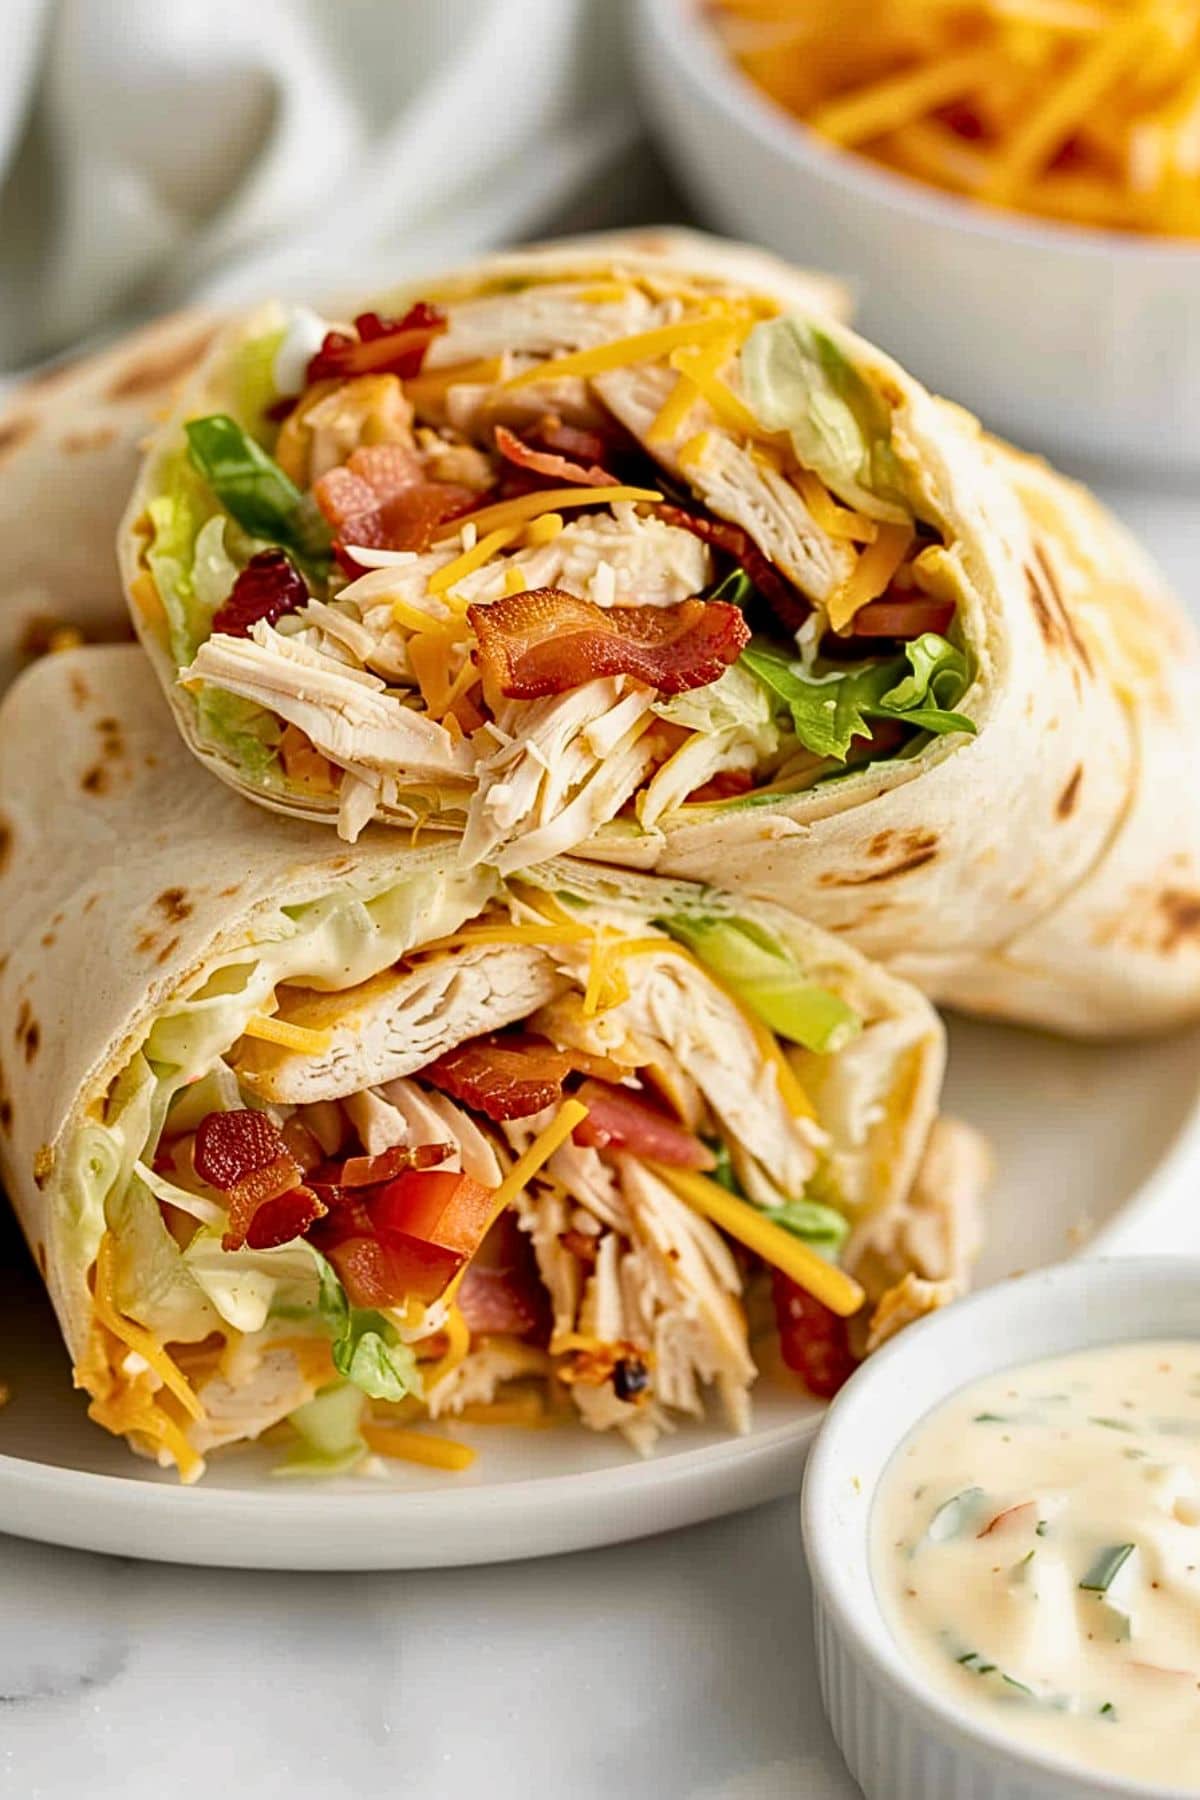 Shredded chicken with crumbled bacon, shredded lettuce, diced tomatoes, and cheese wrapped in tortilla.